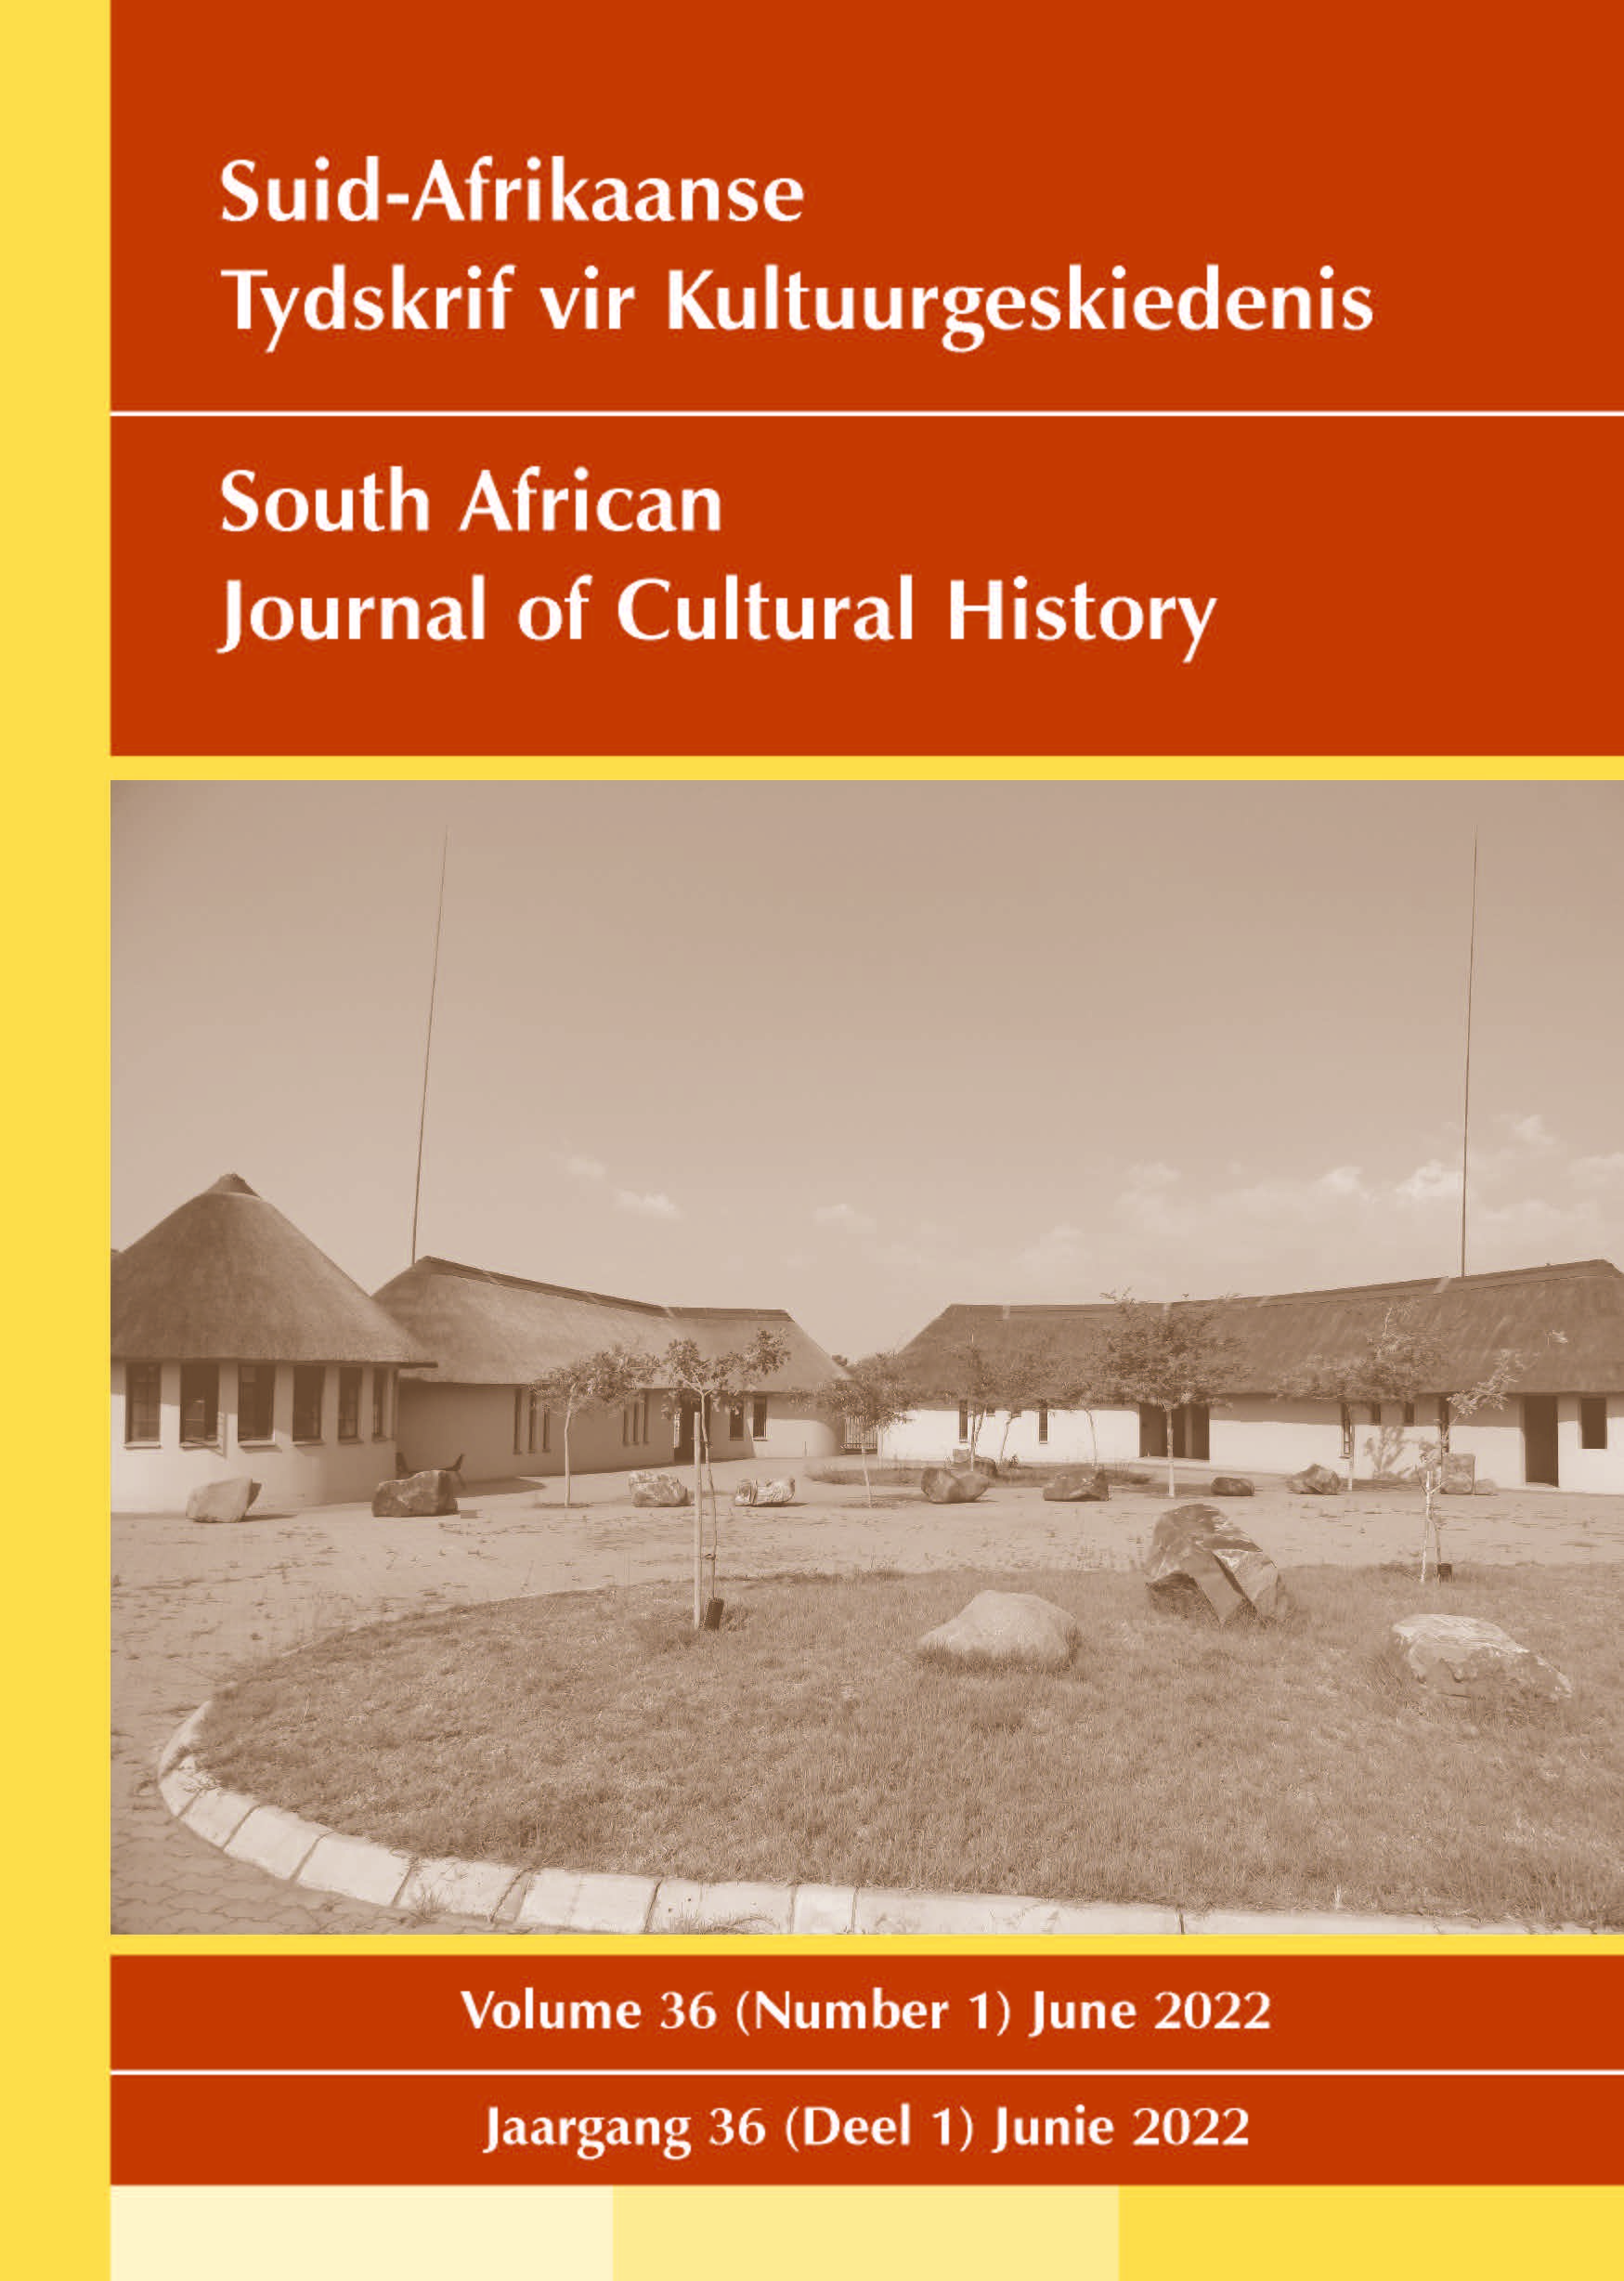 The South African Journal of Cultural History is looking for peer reviewers and members in its editorial advisory board